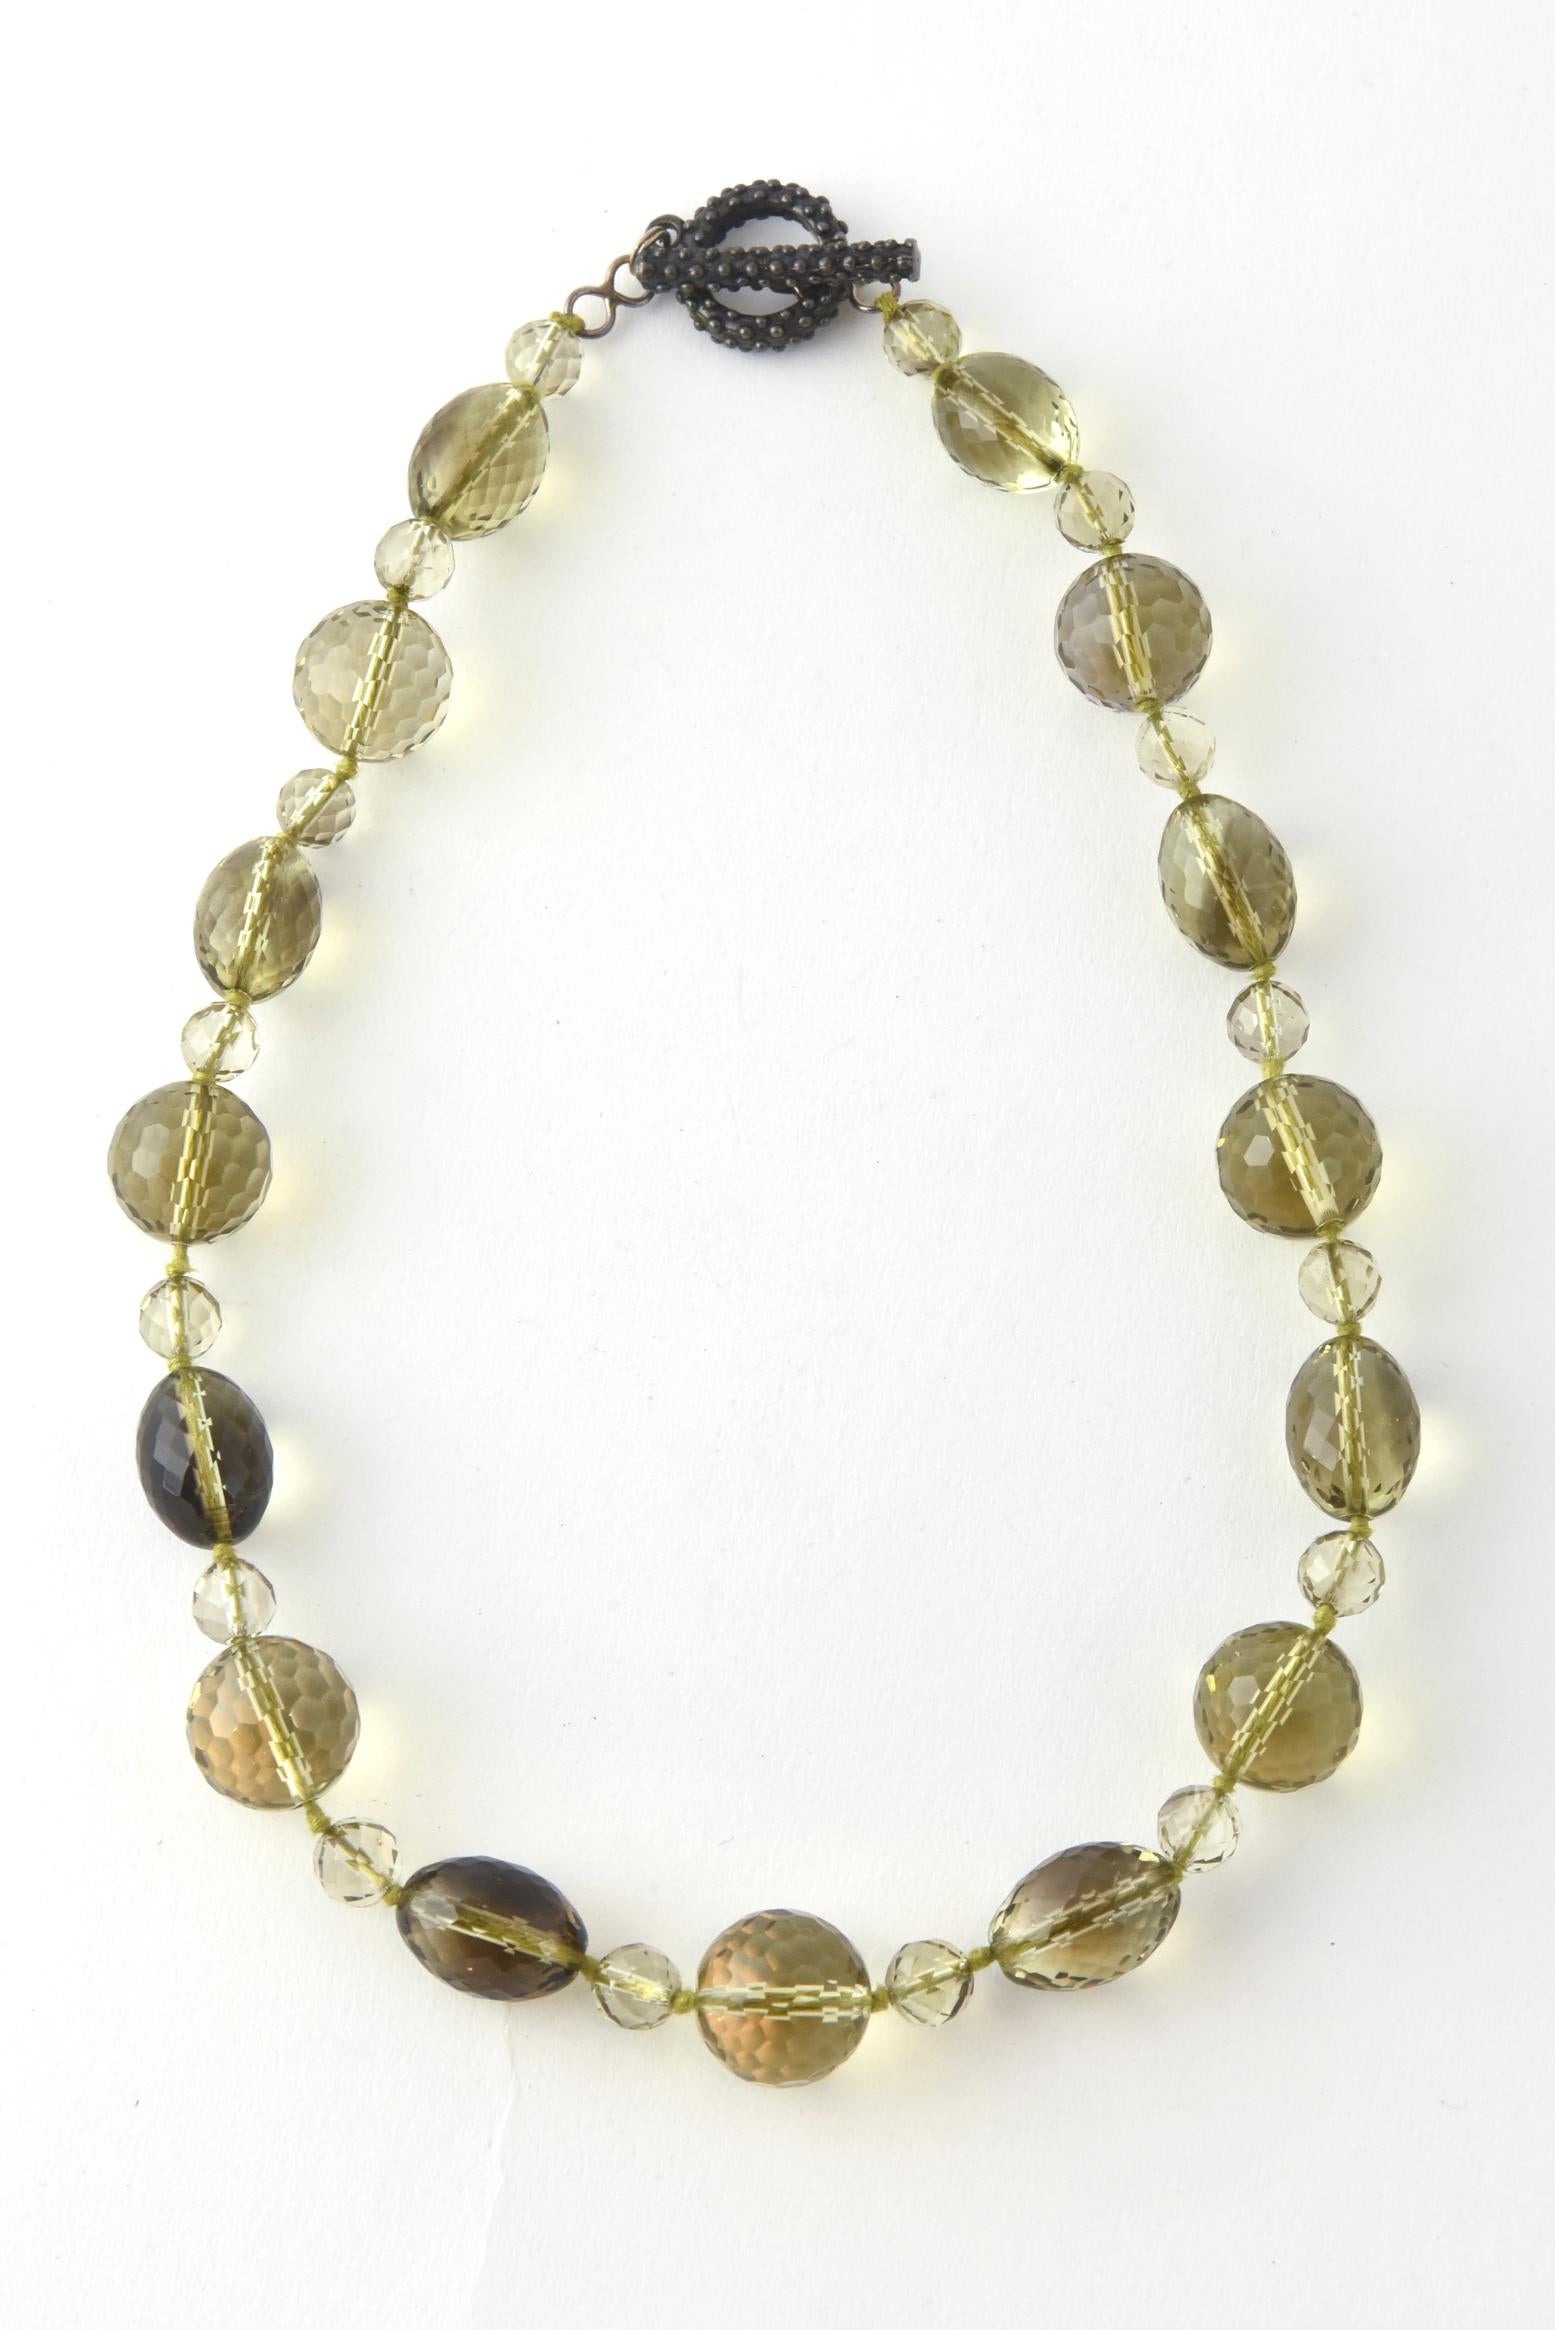 Necklace of faceted glass beads in shades of brown and yellow. Knotted between each bead. Beaded toggle closure with a blackened silver finish.